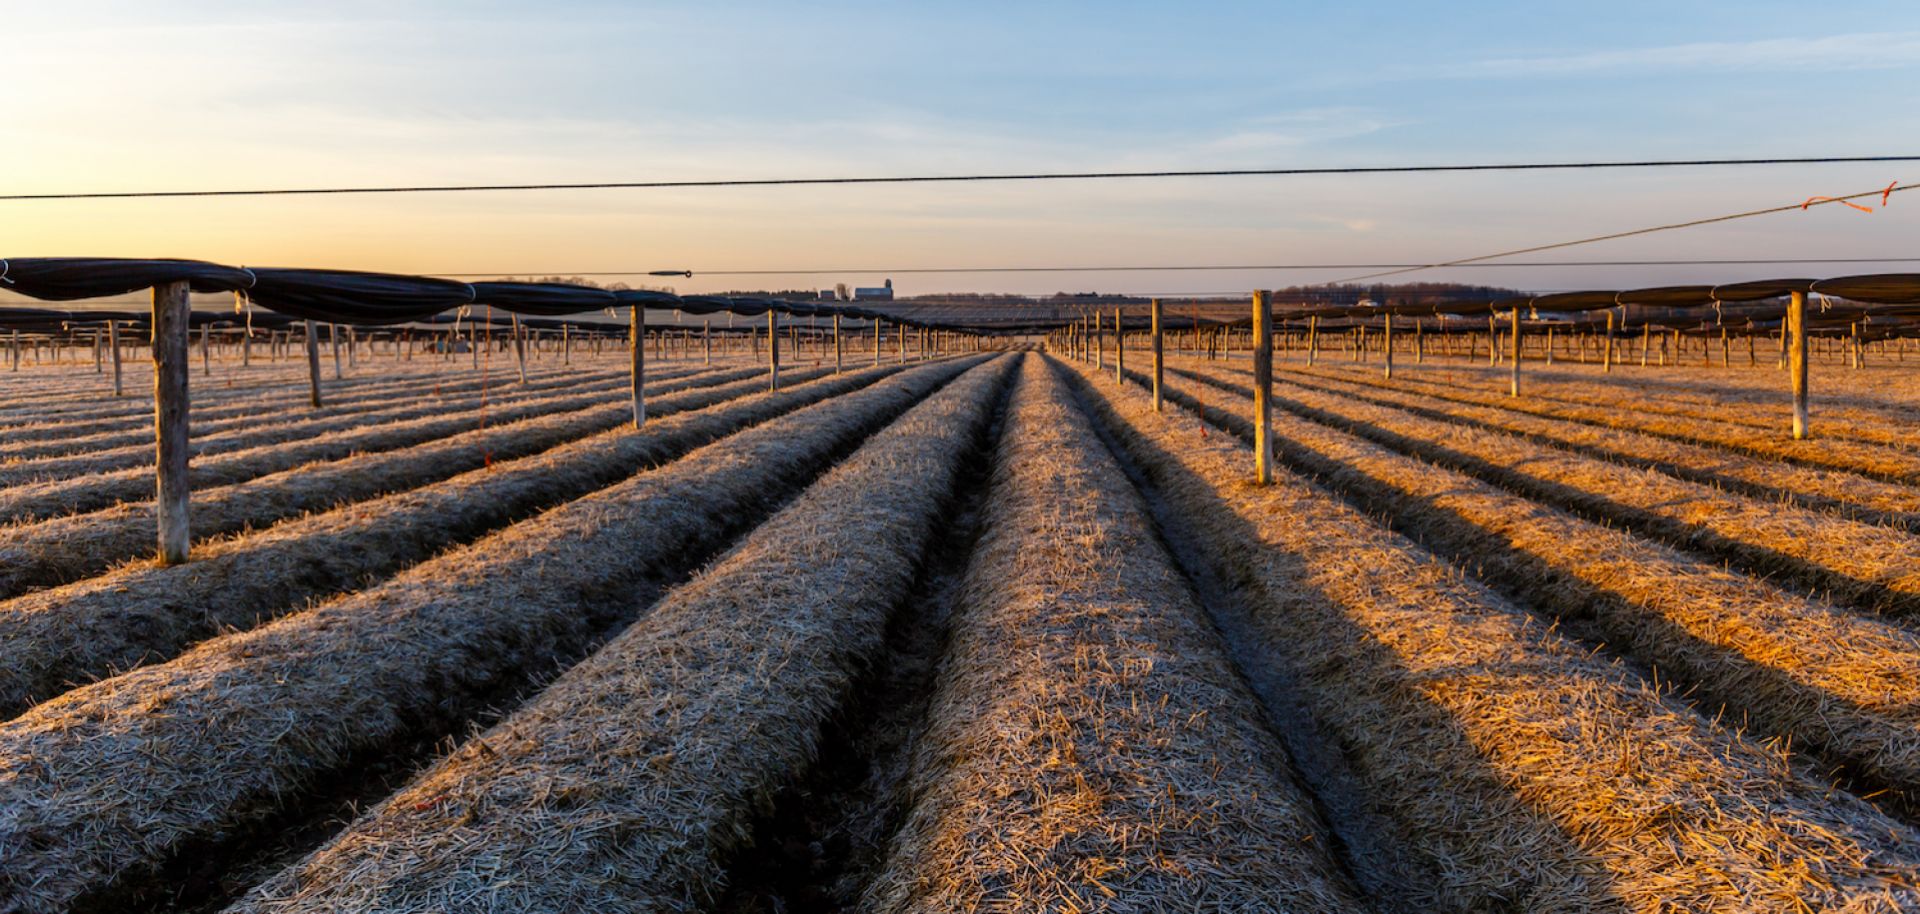 This photograph shows a field of ginseng in Wisconsin.